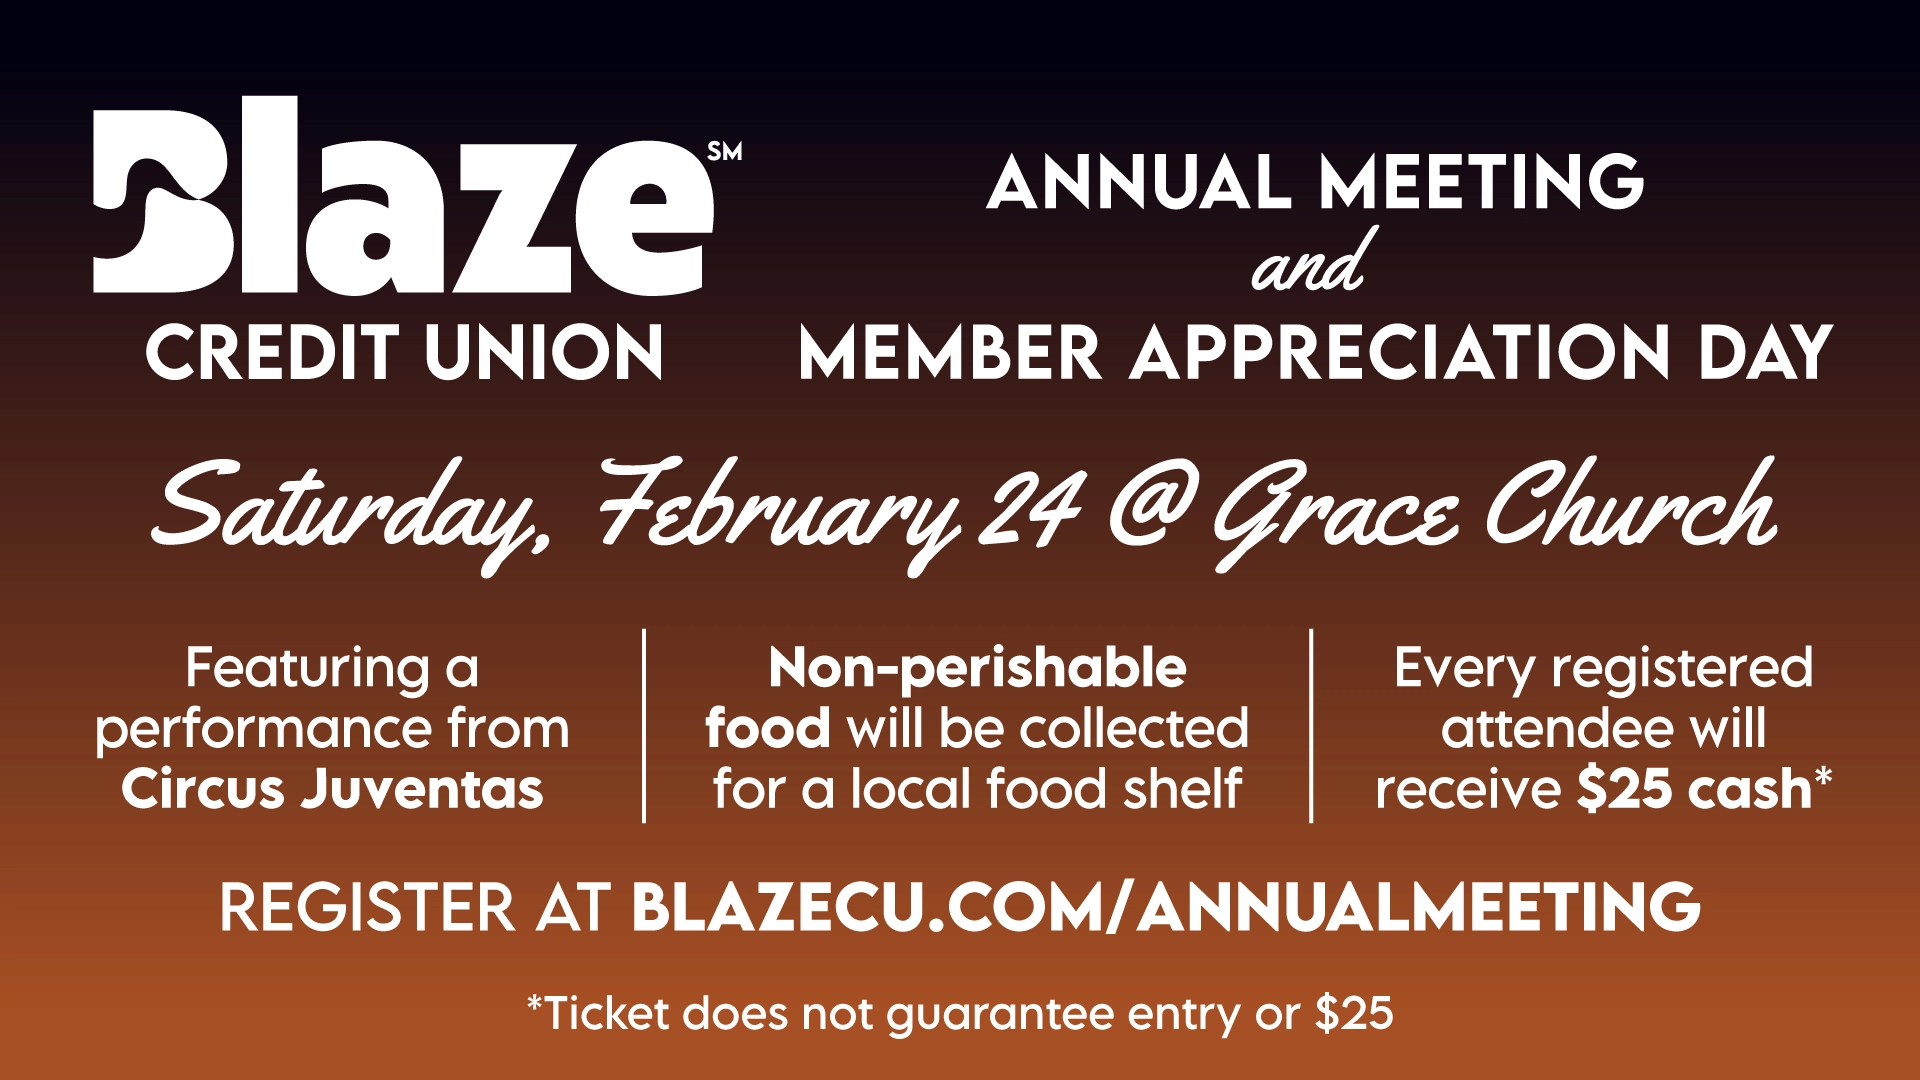 Blaze Annual Meeting & Member Appreciation Day. Saturday, February 24 at Grace Church, Eden Prairie. Every registered attendee will receive $25 cash*